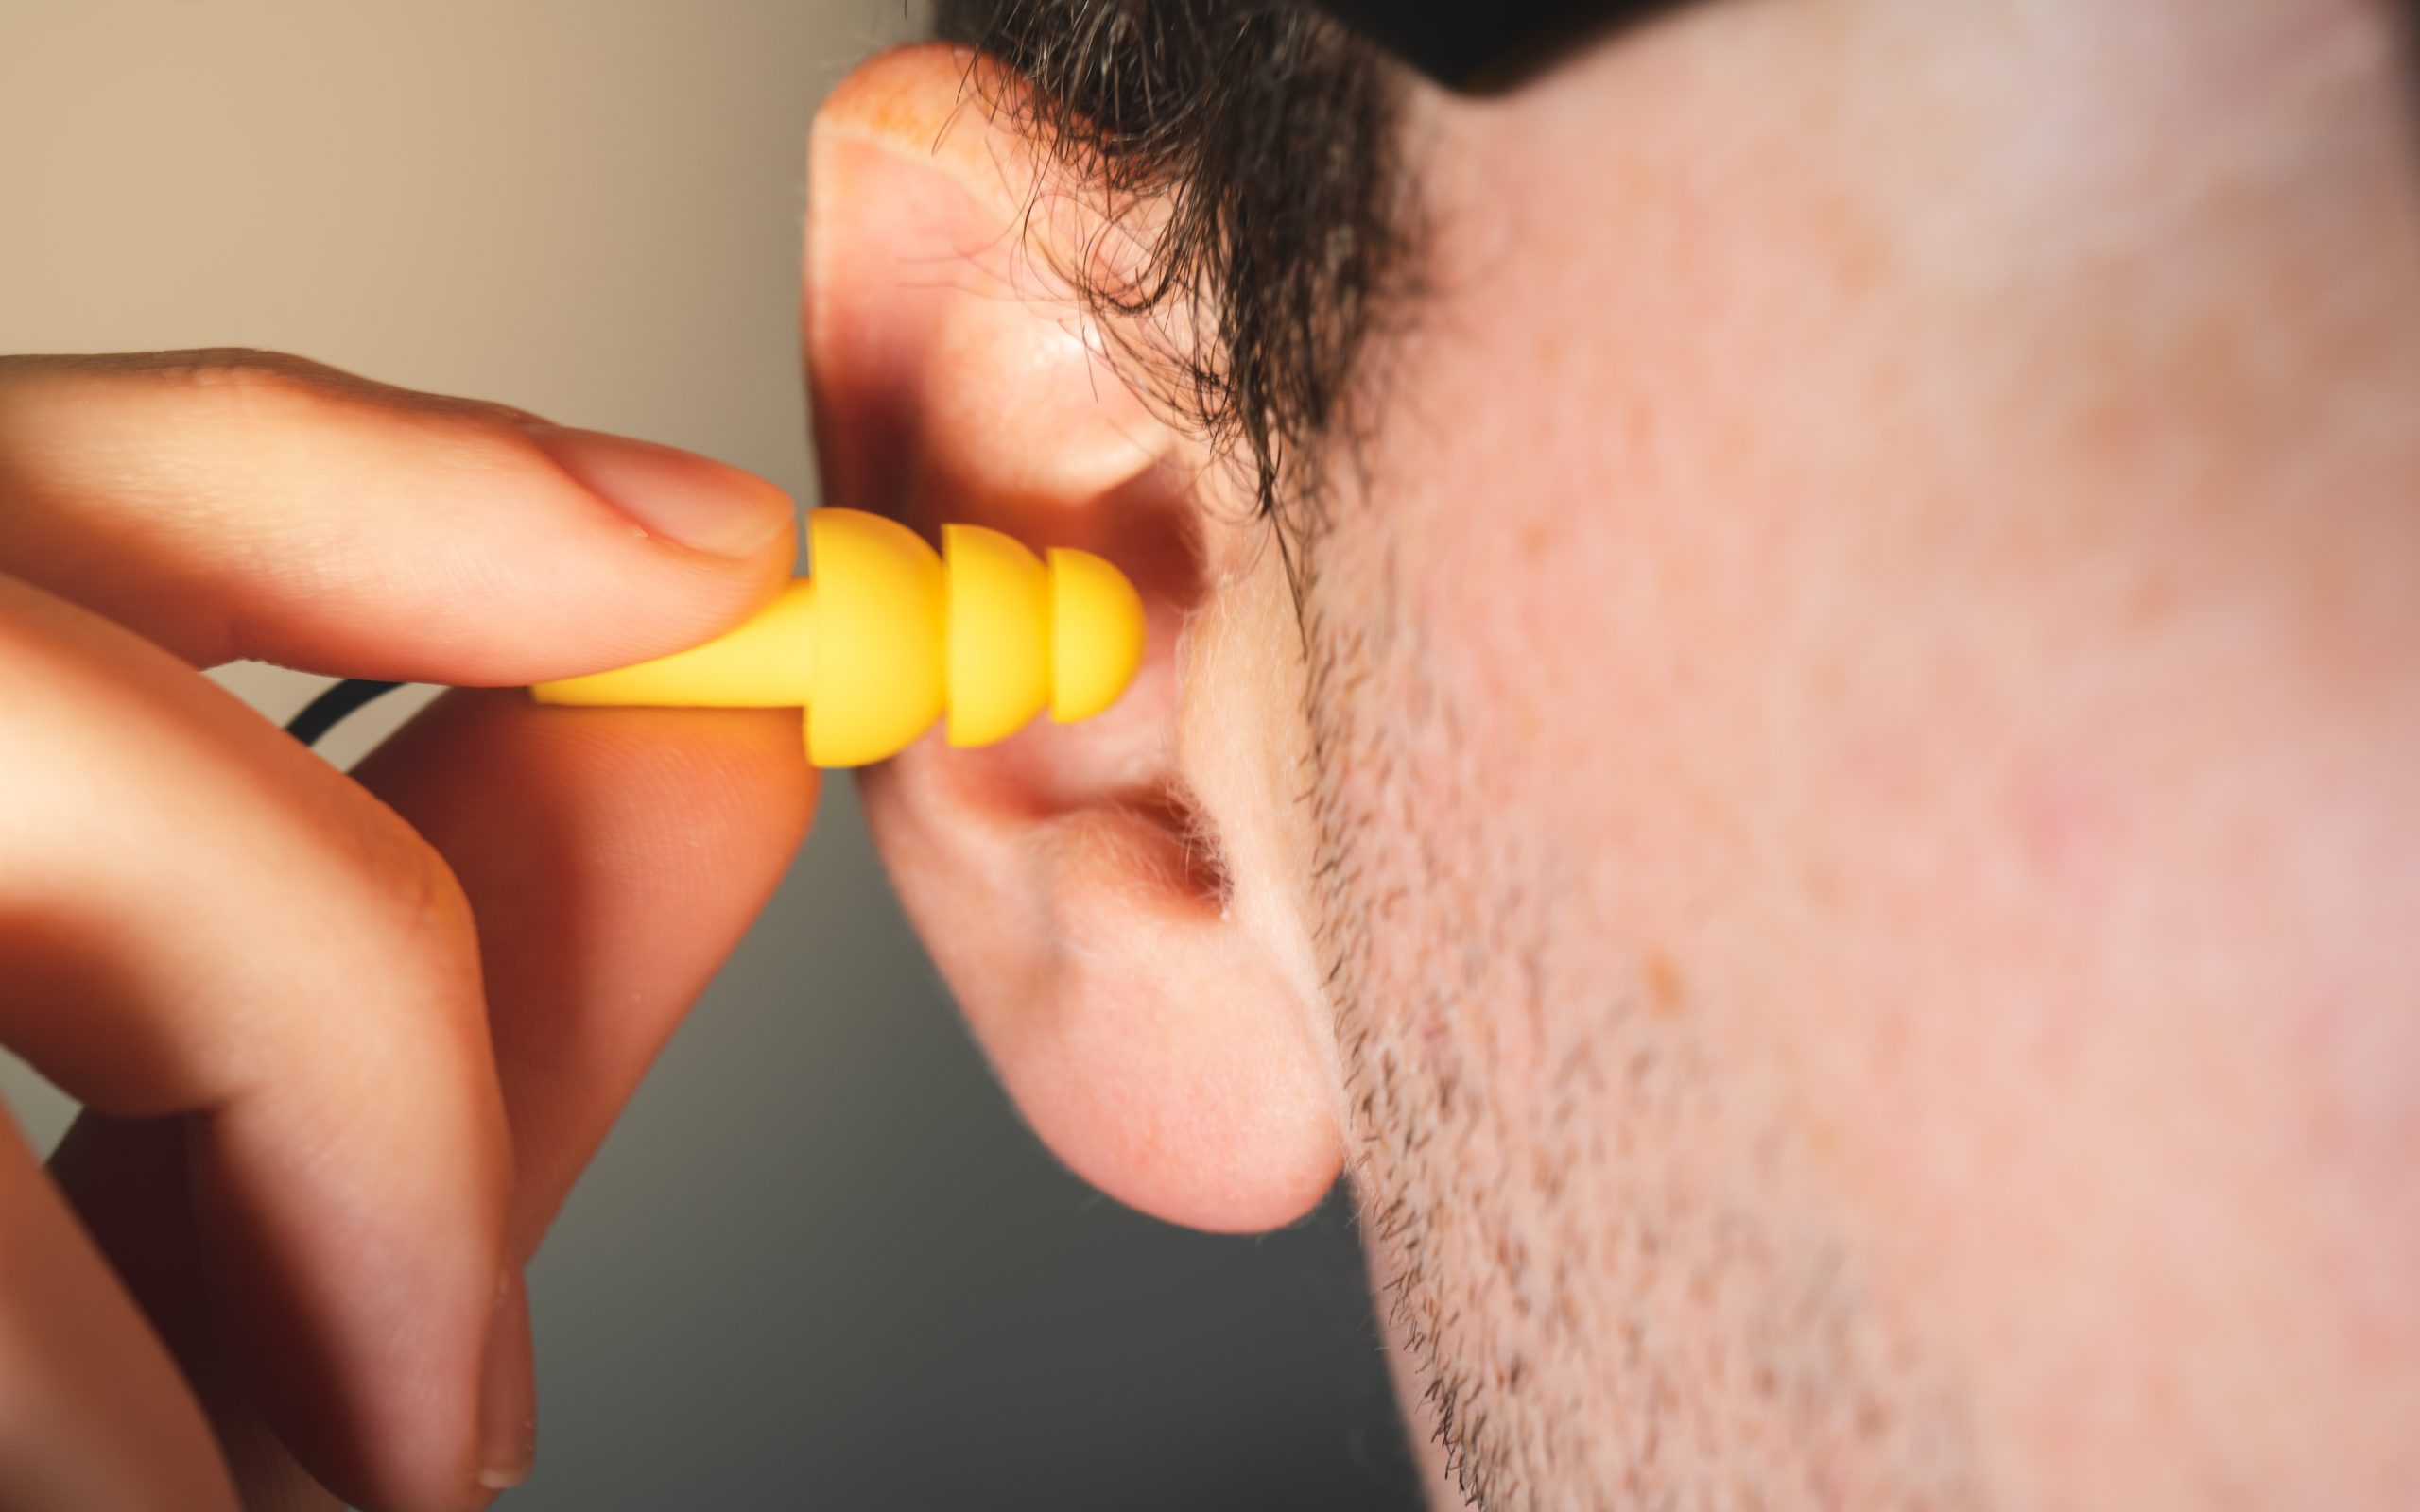 How to Prevent Hearing Loss with Ear Protection